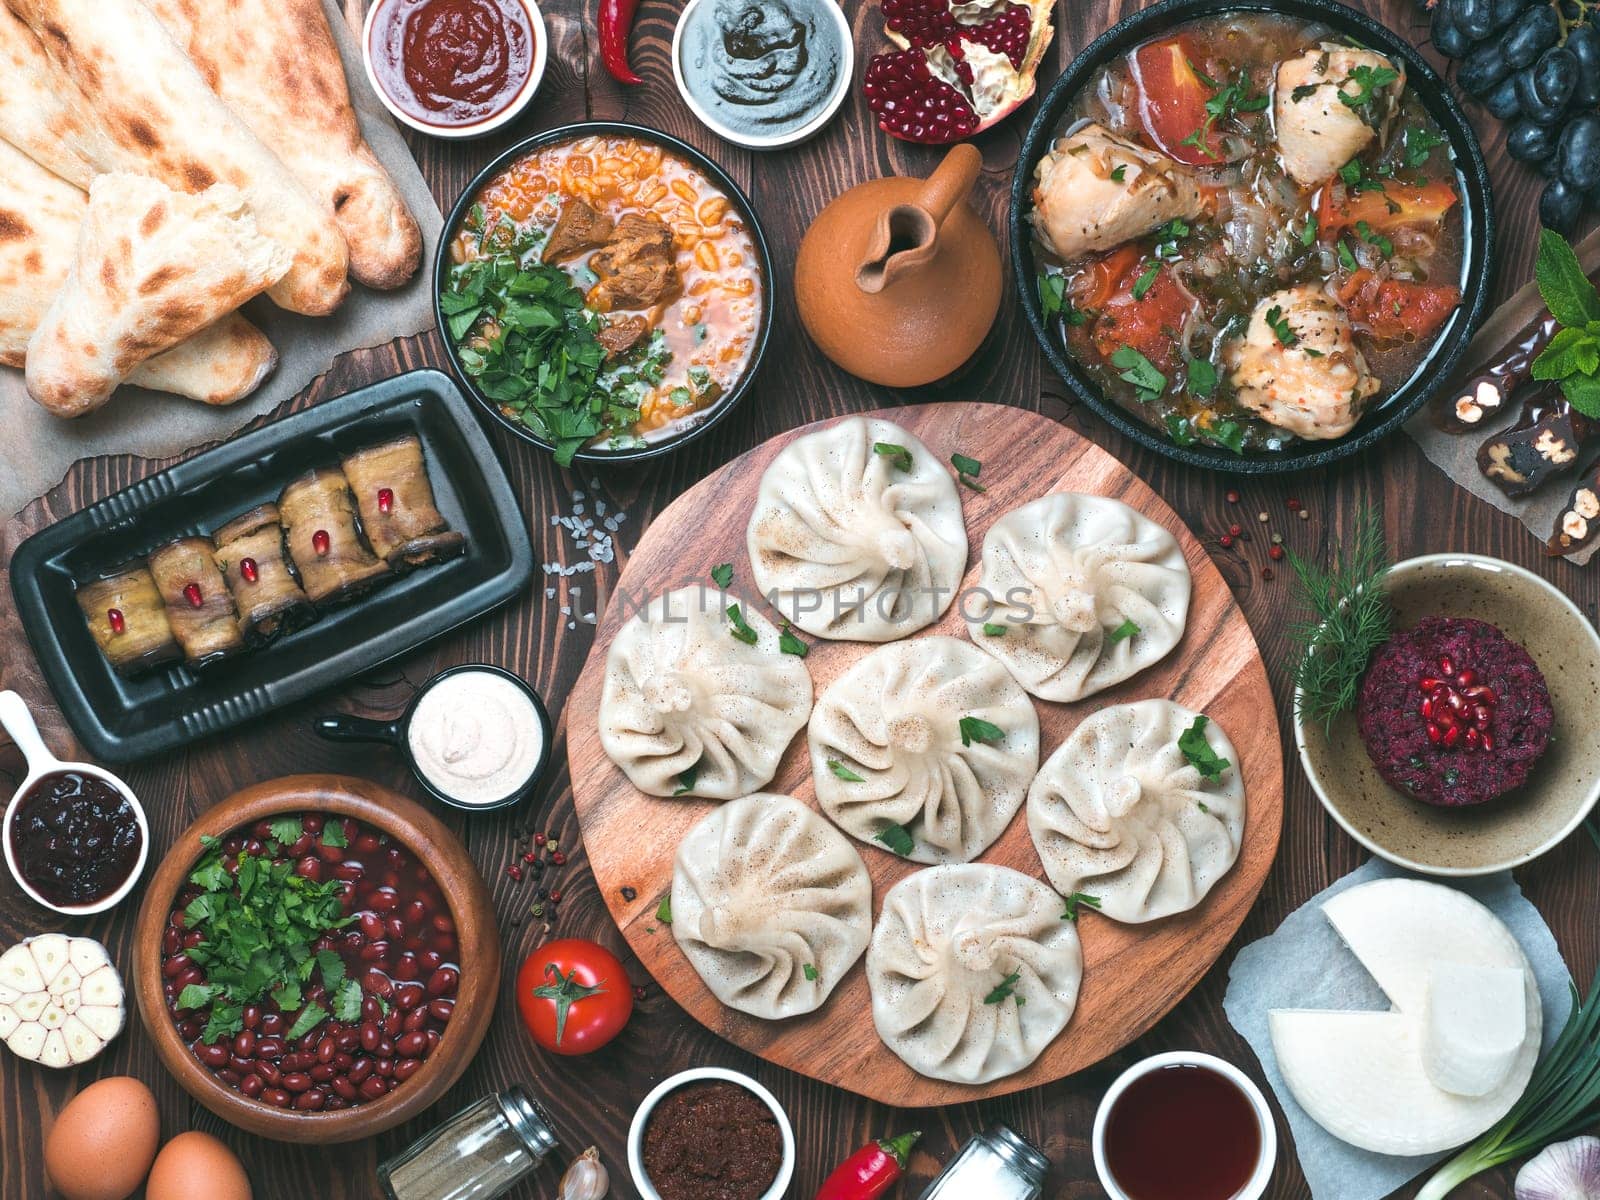 View from above of georgian cuisine on brown wooden table. Traditional georgian cuisine and food - khinkali, kharcho, chahokhbili, phali, lobio and local sauces - tkemali, satsebeli, adzhika. Top view